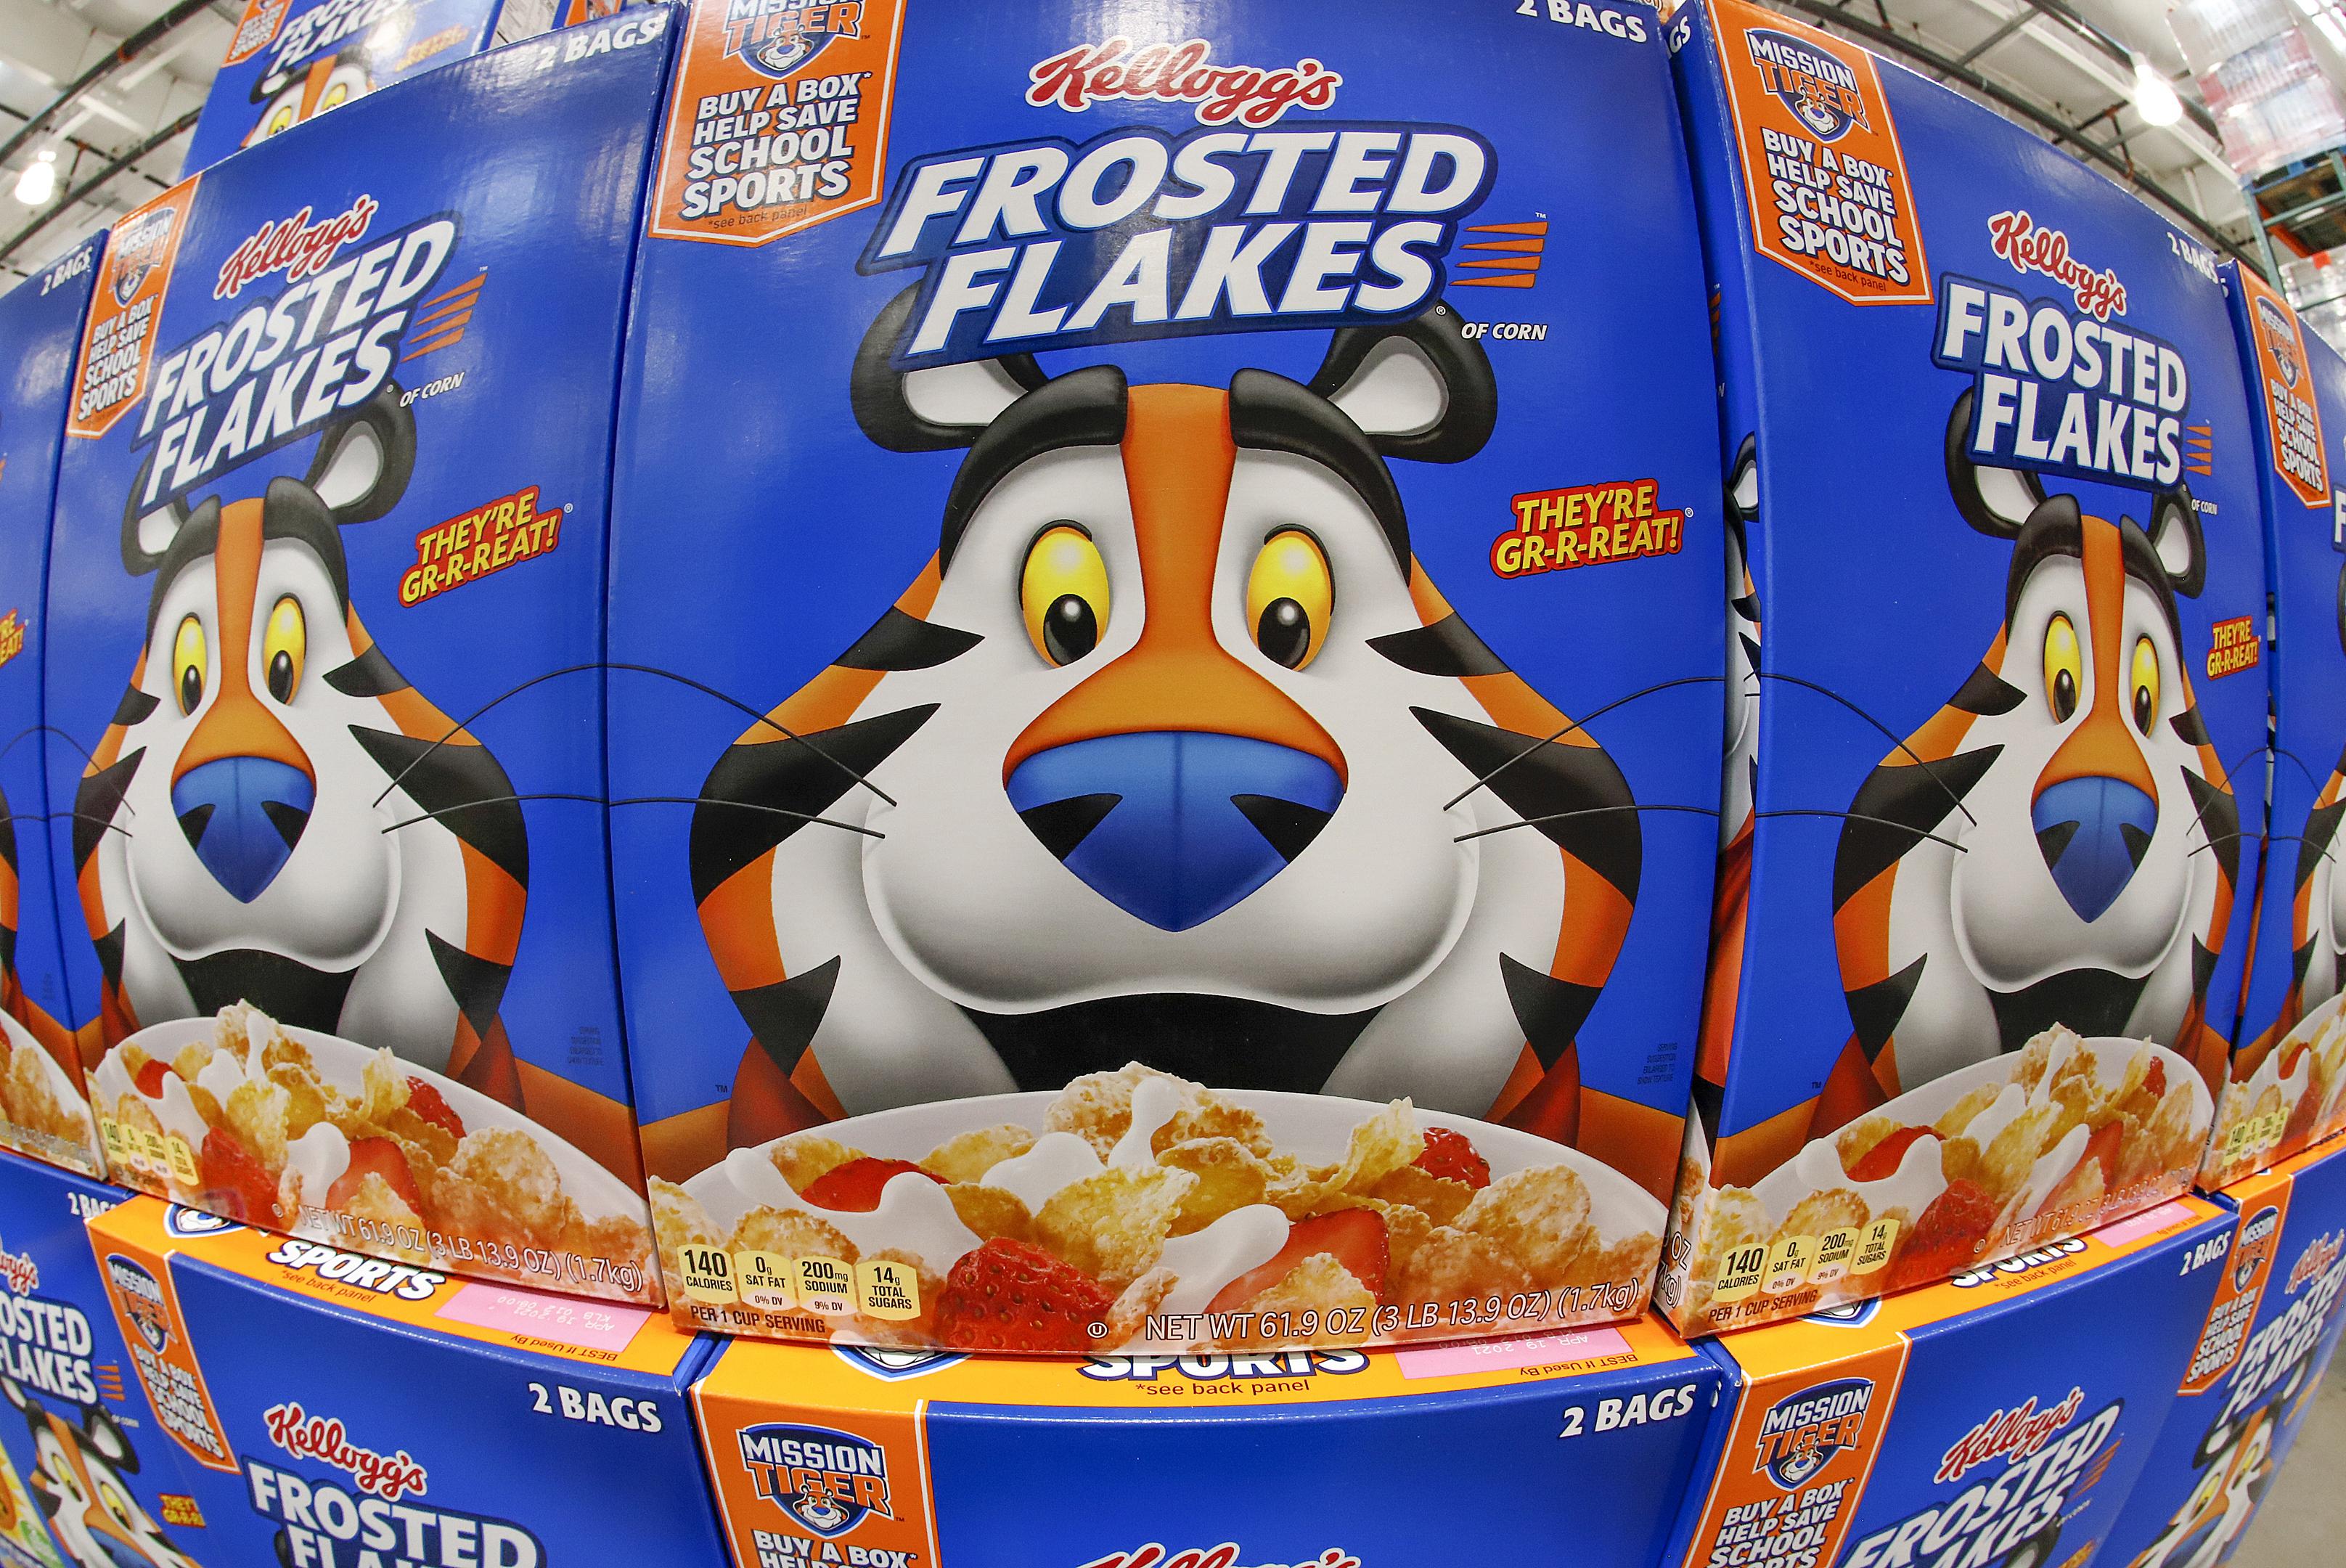 Kellogg's CEO says eat cereal to save money, though prices are up 28% -  Washington Times